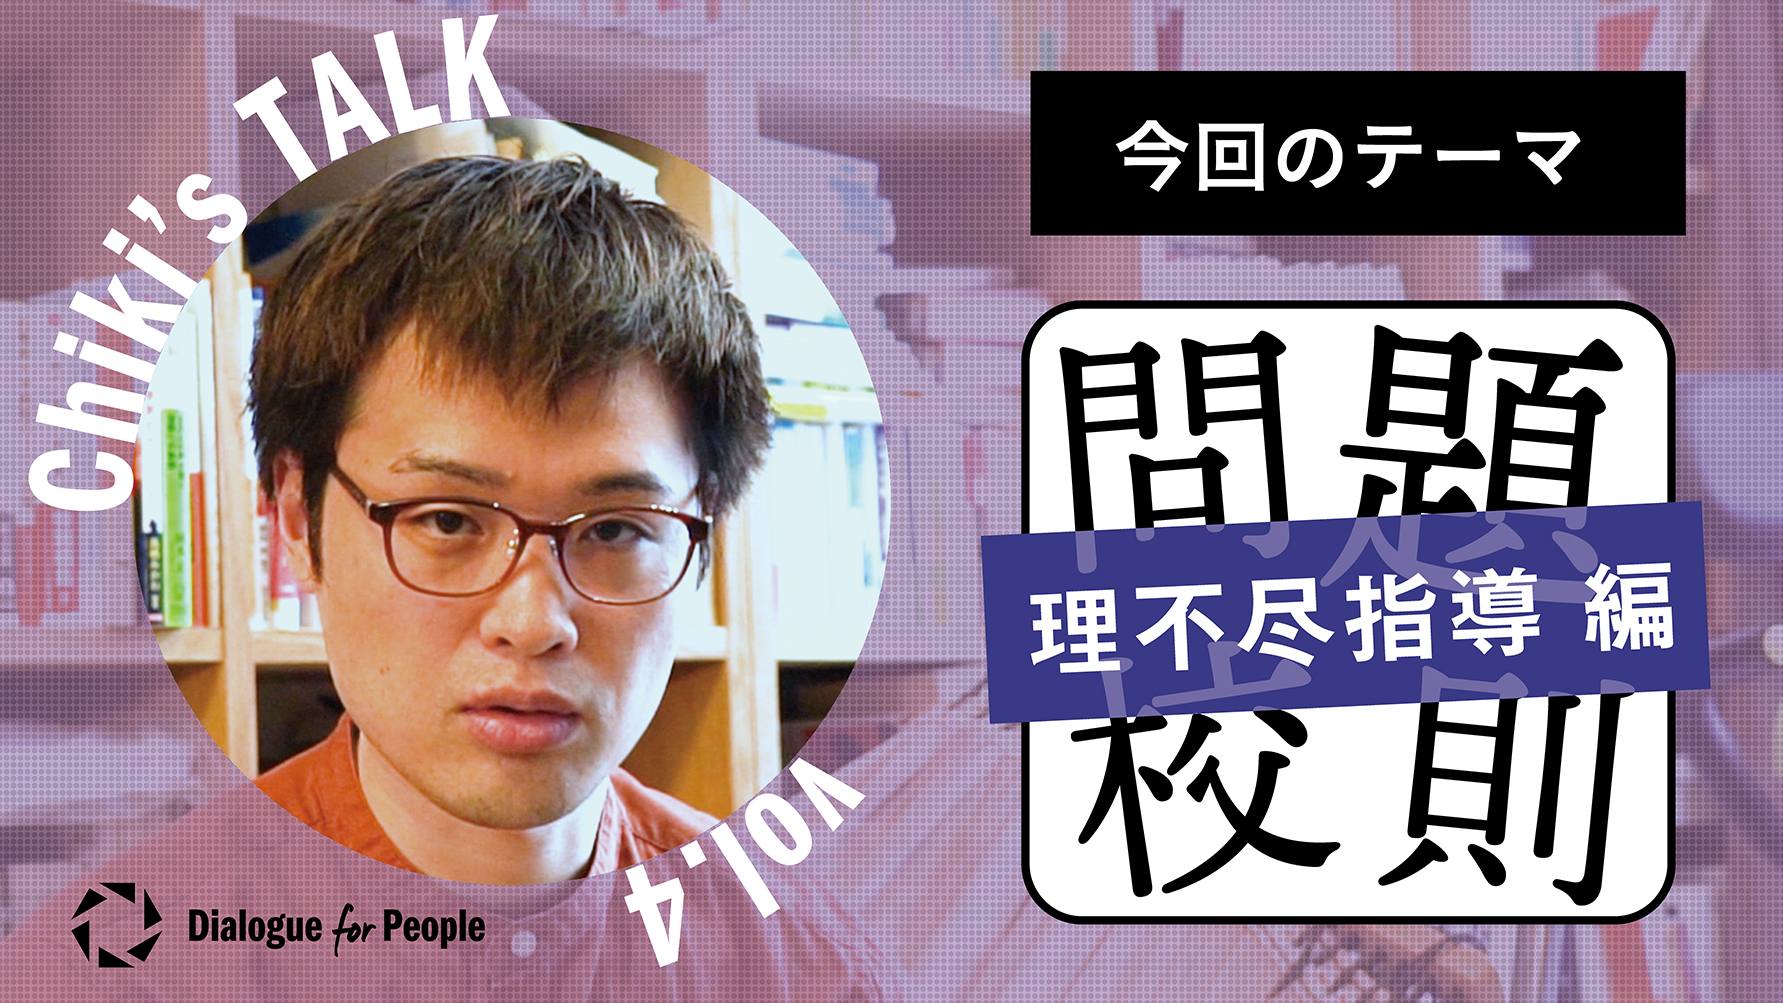 Dialogue for People荻上チキ氏解説「問題校則（理不尽指導編）」／Chiki’s Talk_004